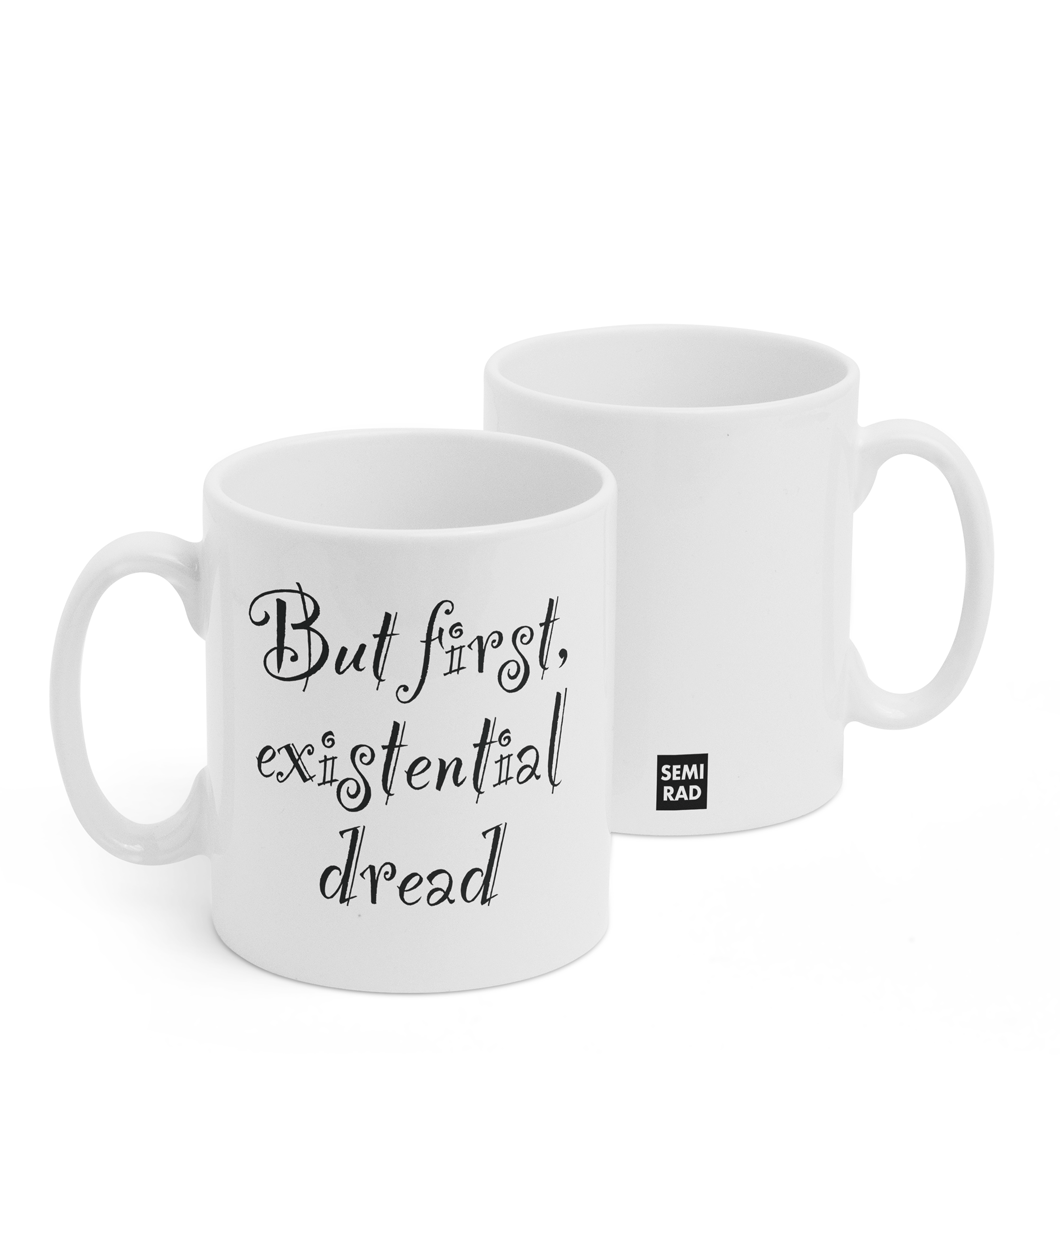 Two white mugs sitting next to each other showing two sides of the same mug. The front side has text that reads "But first existential dread" is decorative lettering. On the back of the mug is a small black square with the words "Semi Rad".